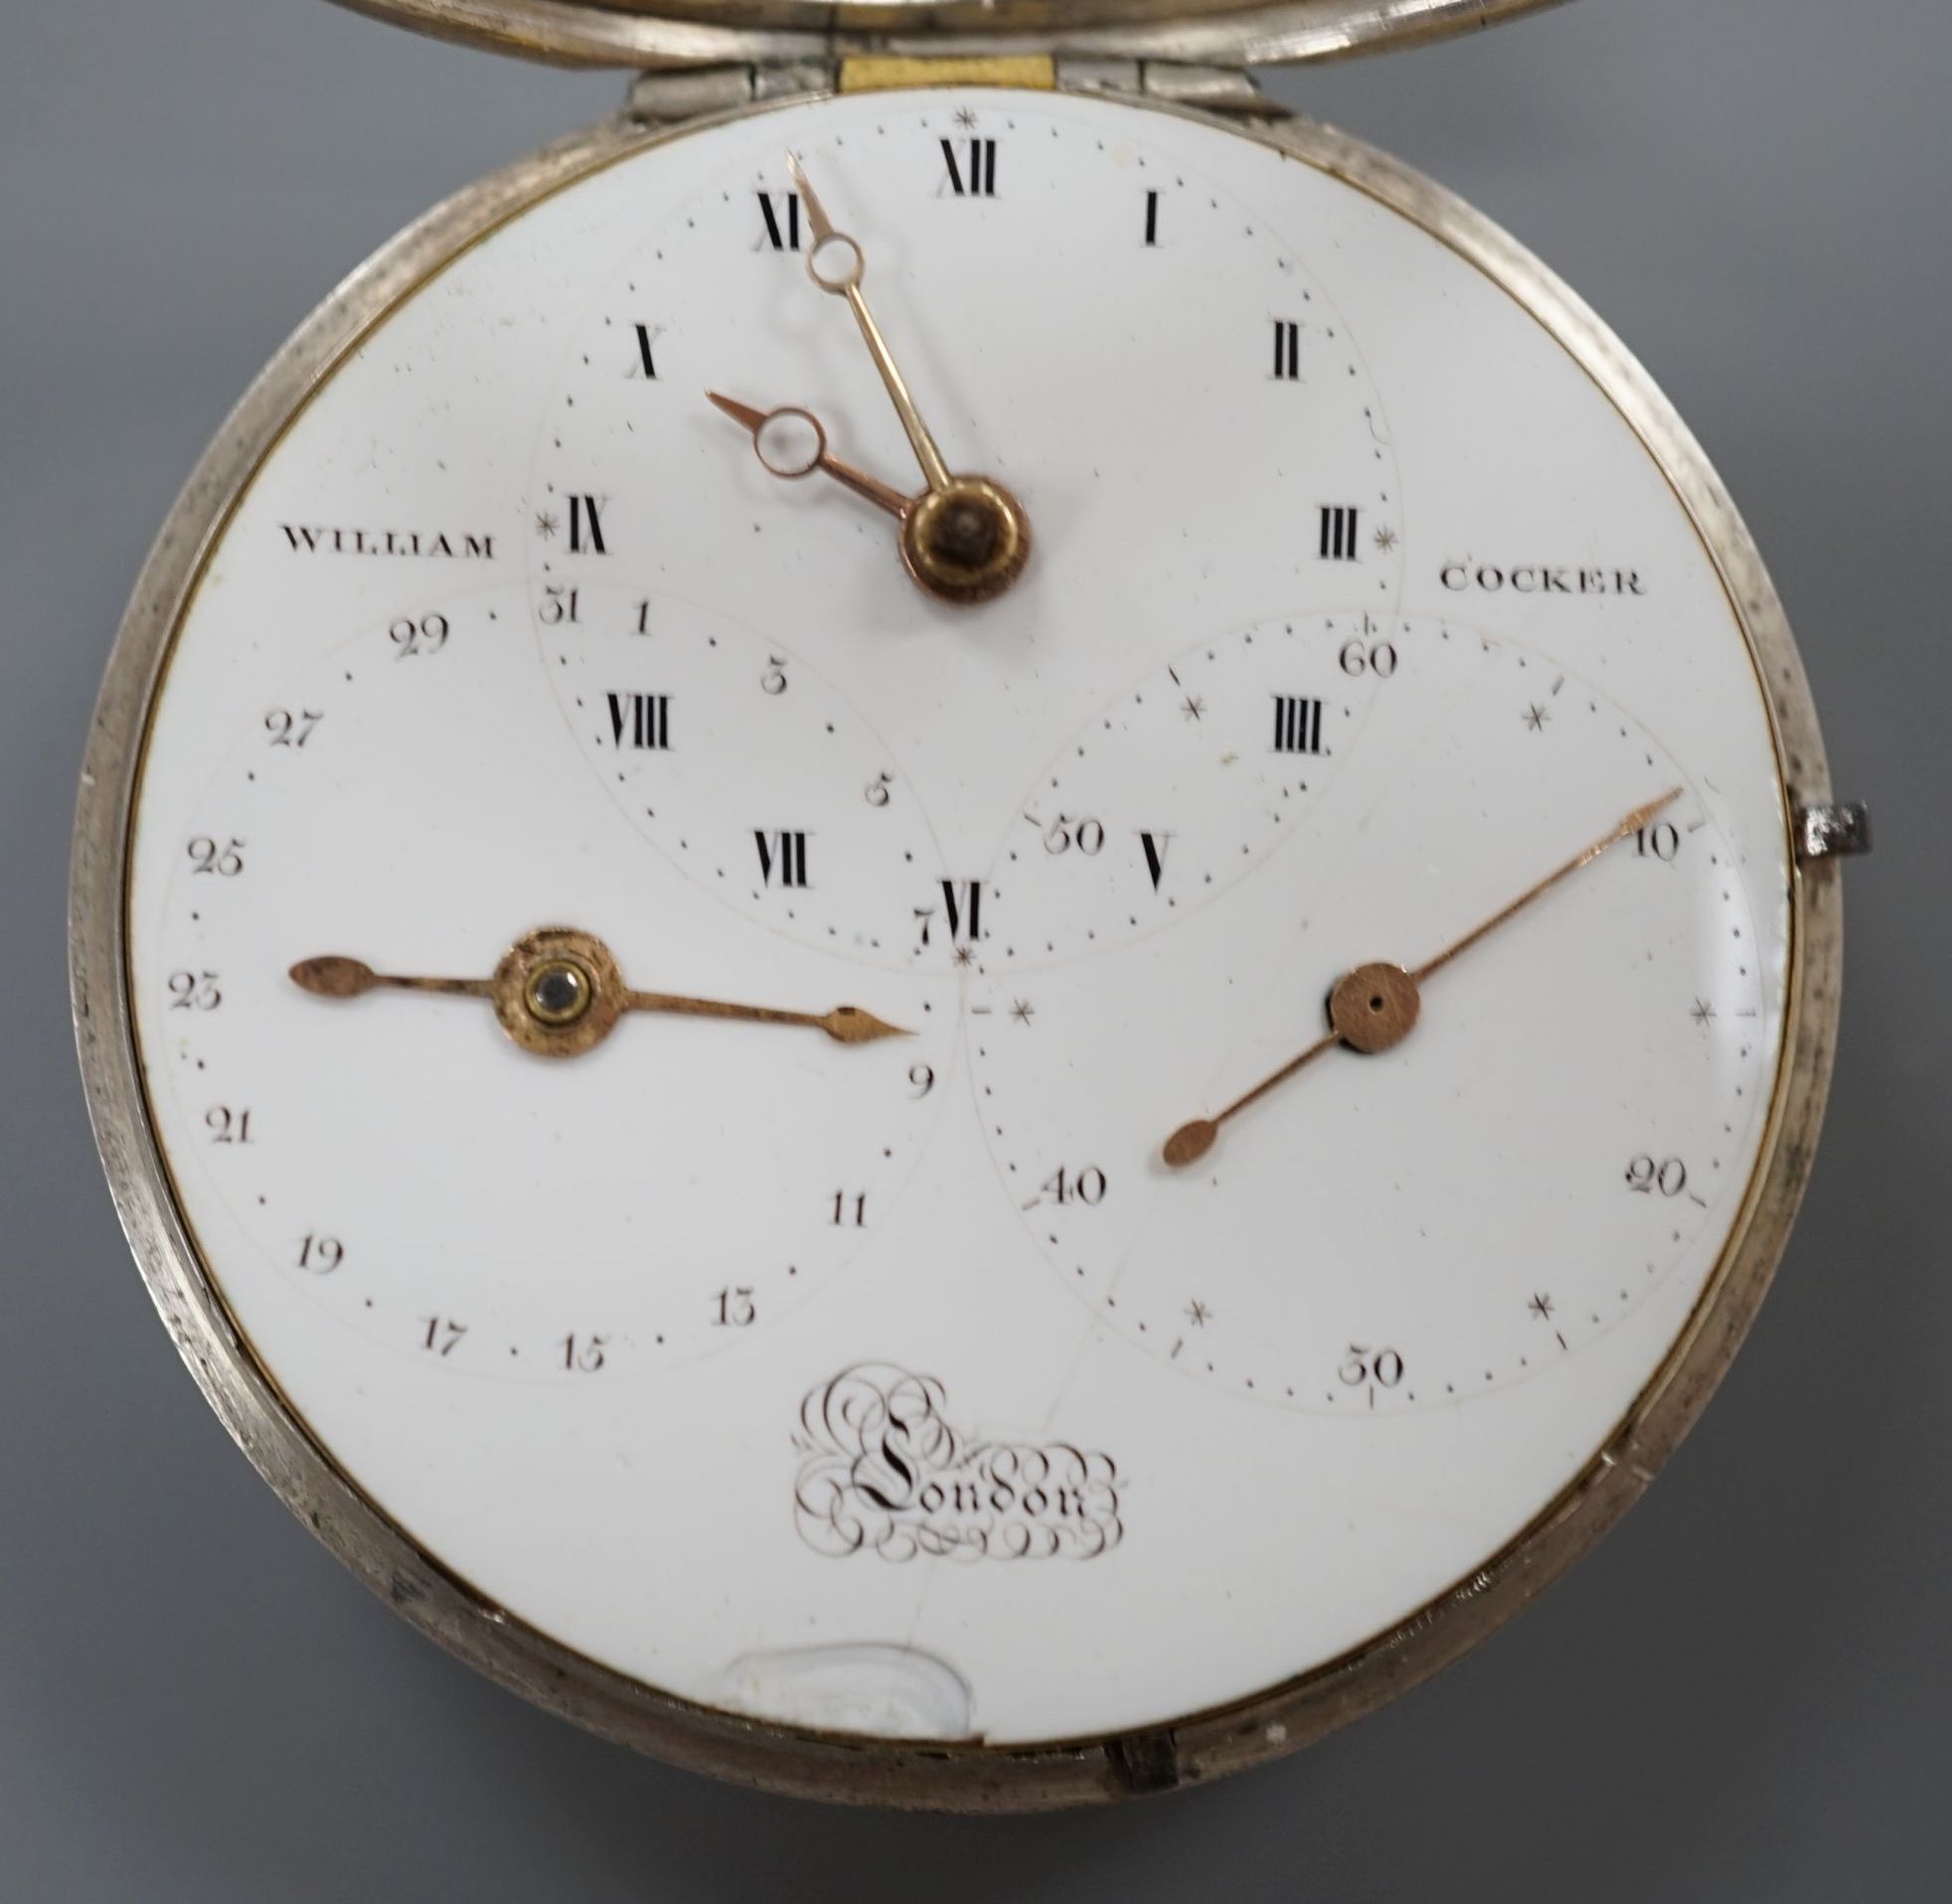 A George III silver pair case keywind pocket watch, by John Williams, Shoreditch, with unusual triple dial, retailed by William Crocker, case diameter, 48mm, the signed movement with diamond set cock.